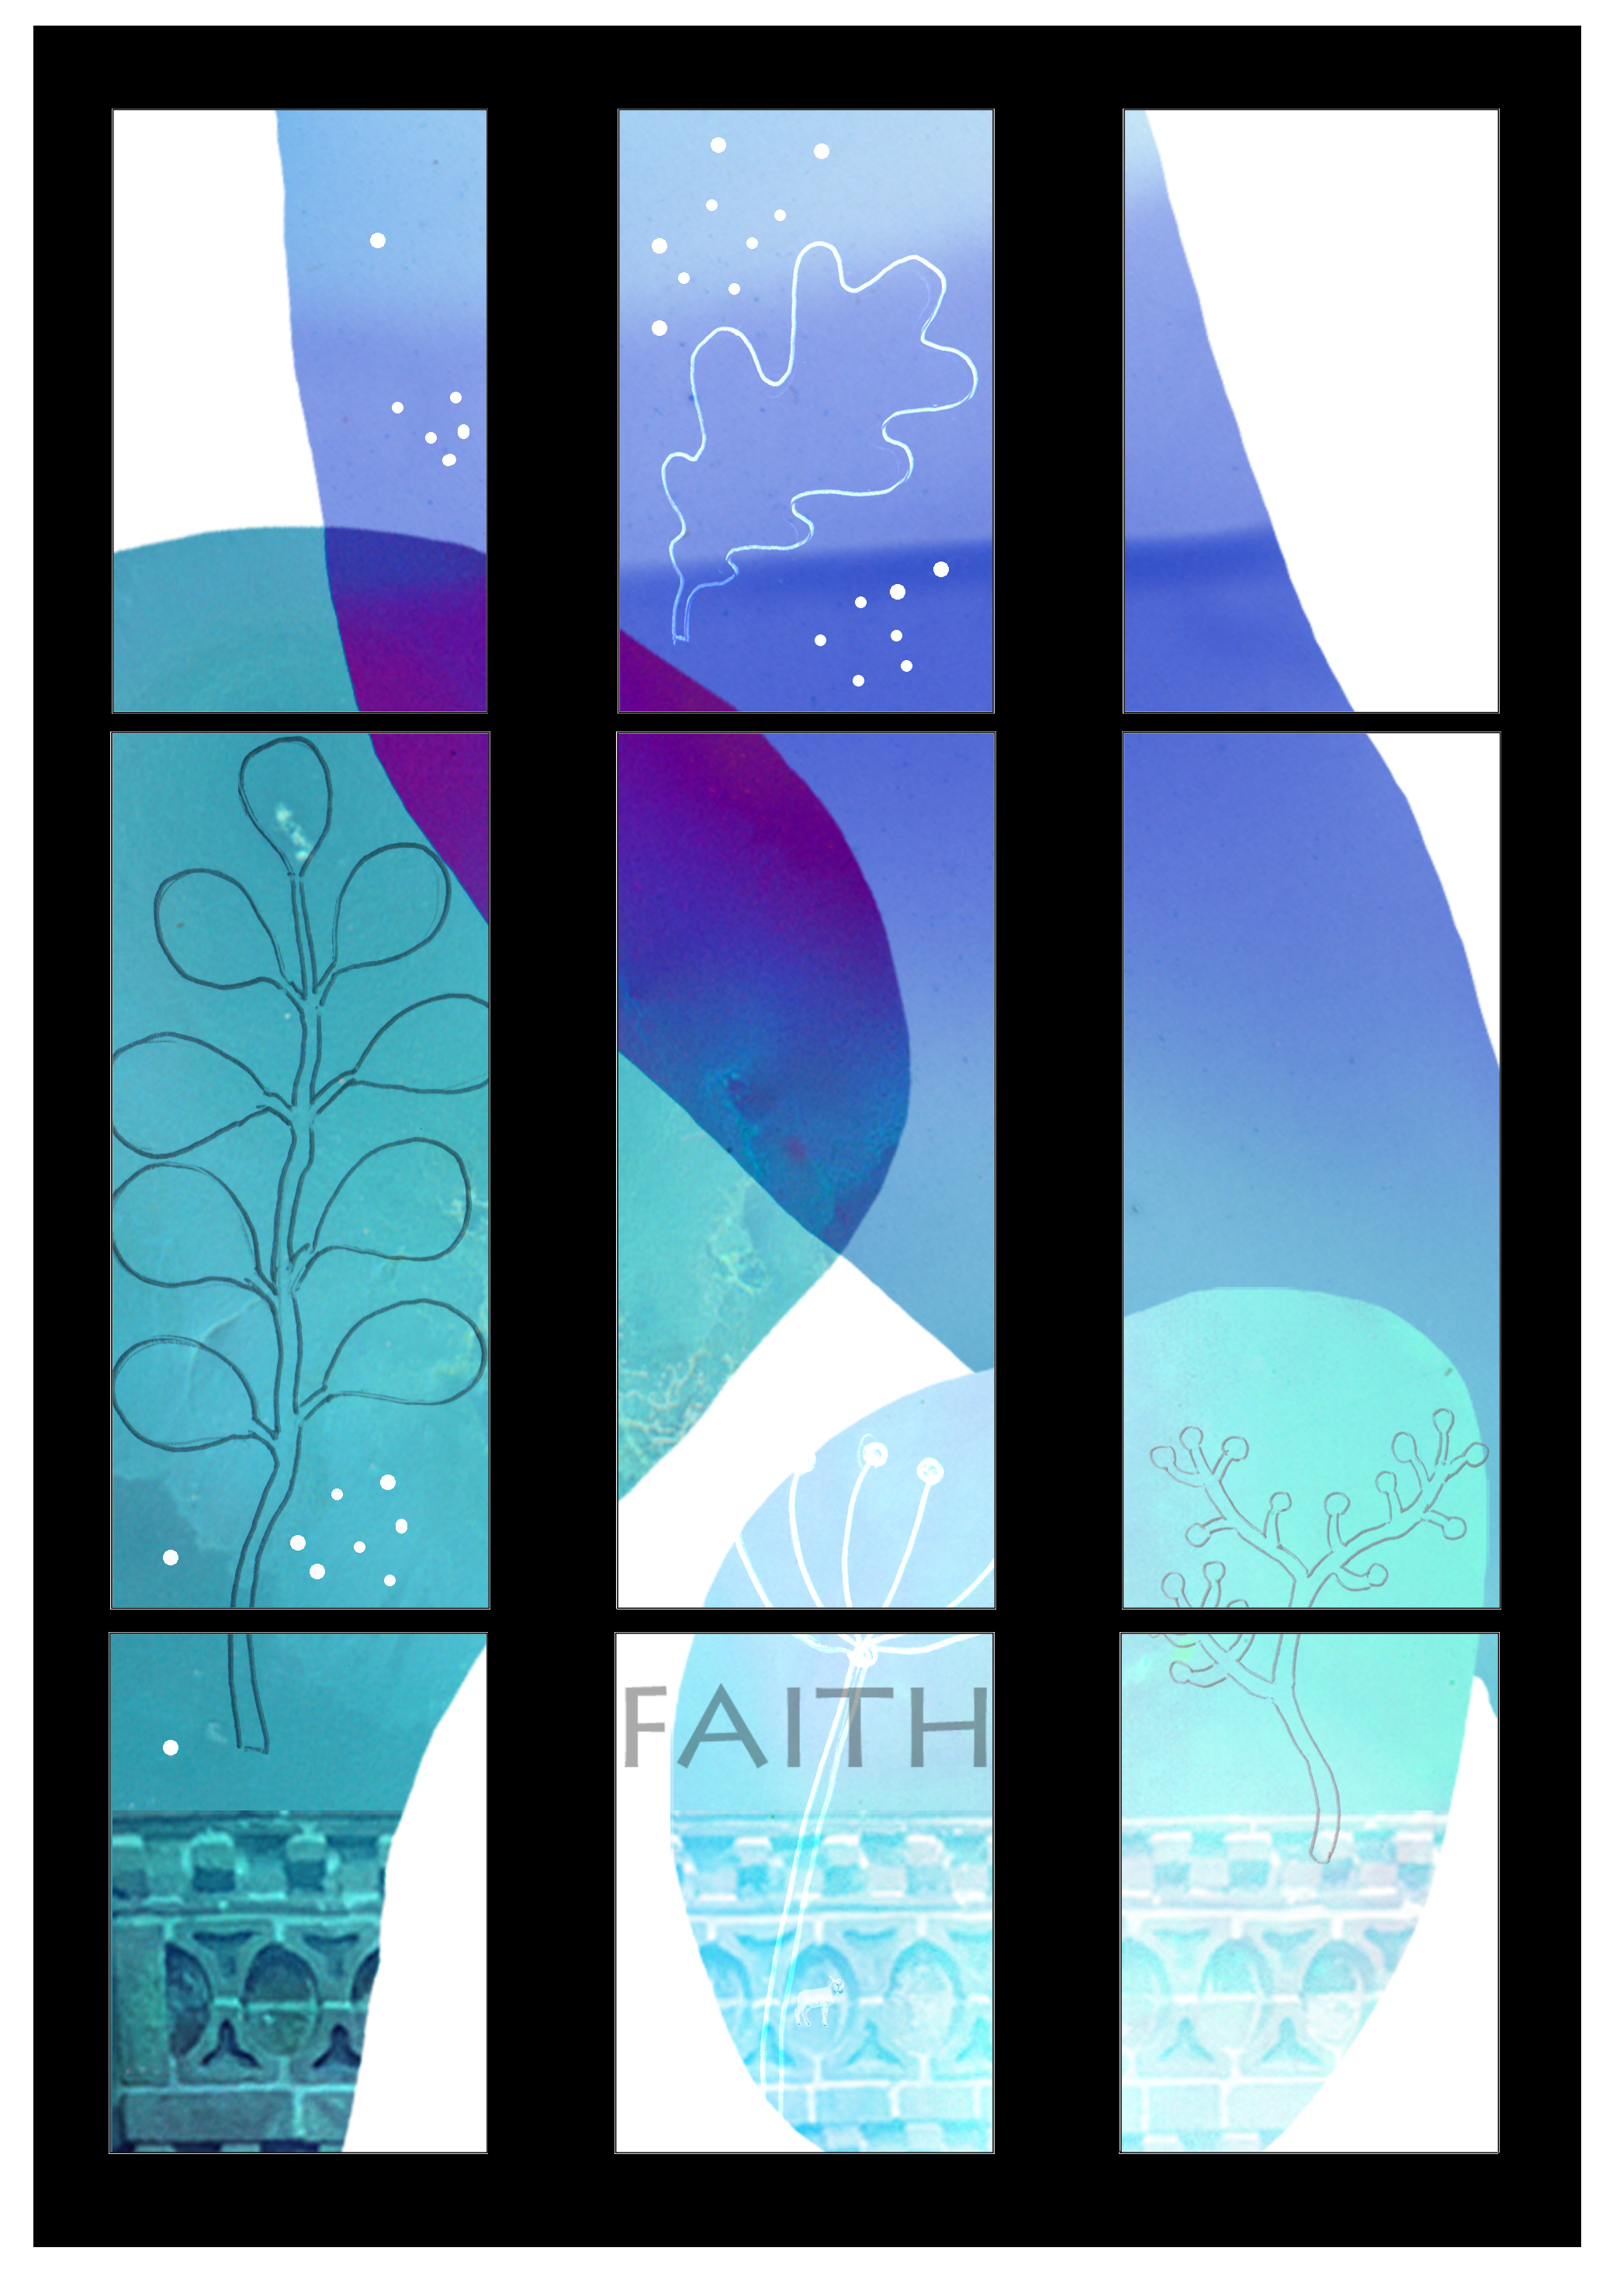 Artist impression of a new modern stained glass window with blue and turquiose shapes, oak leaves, saplings and the word faith